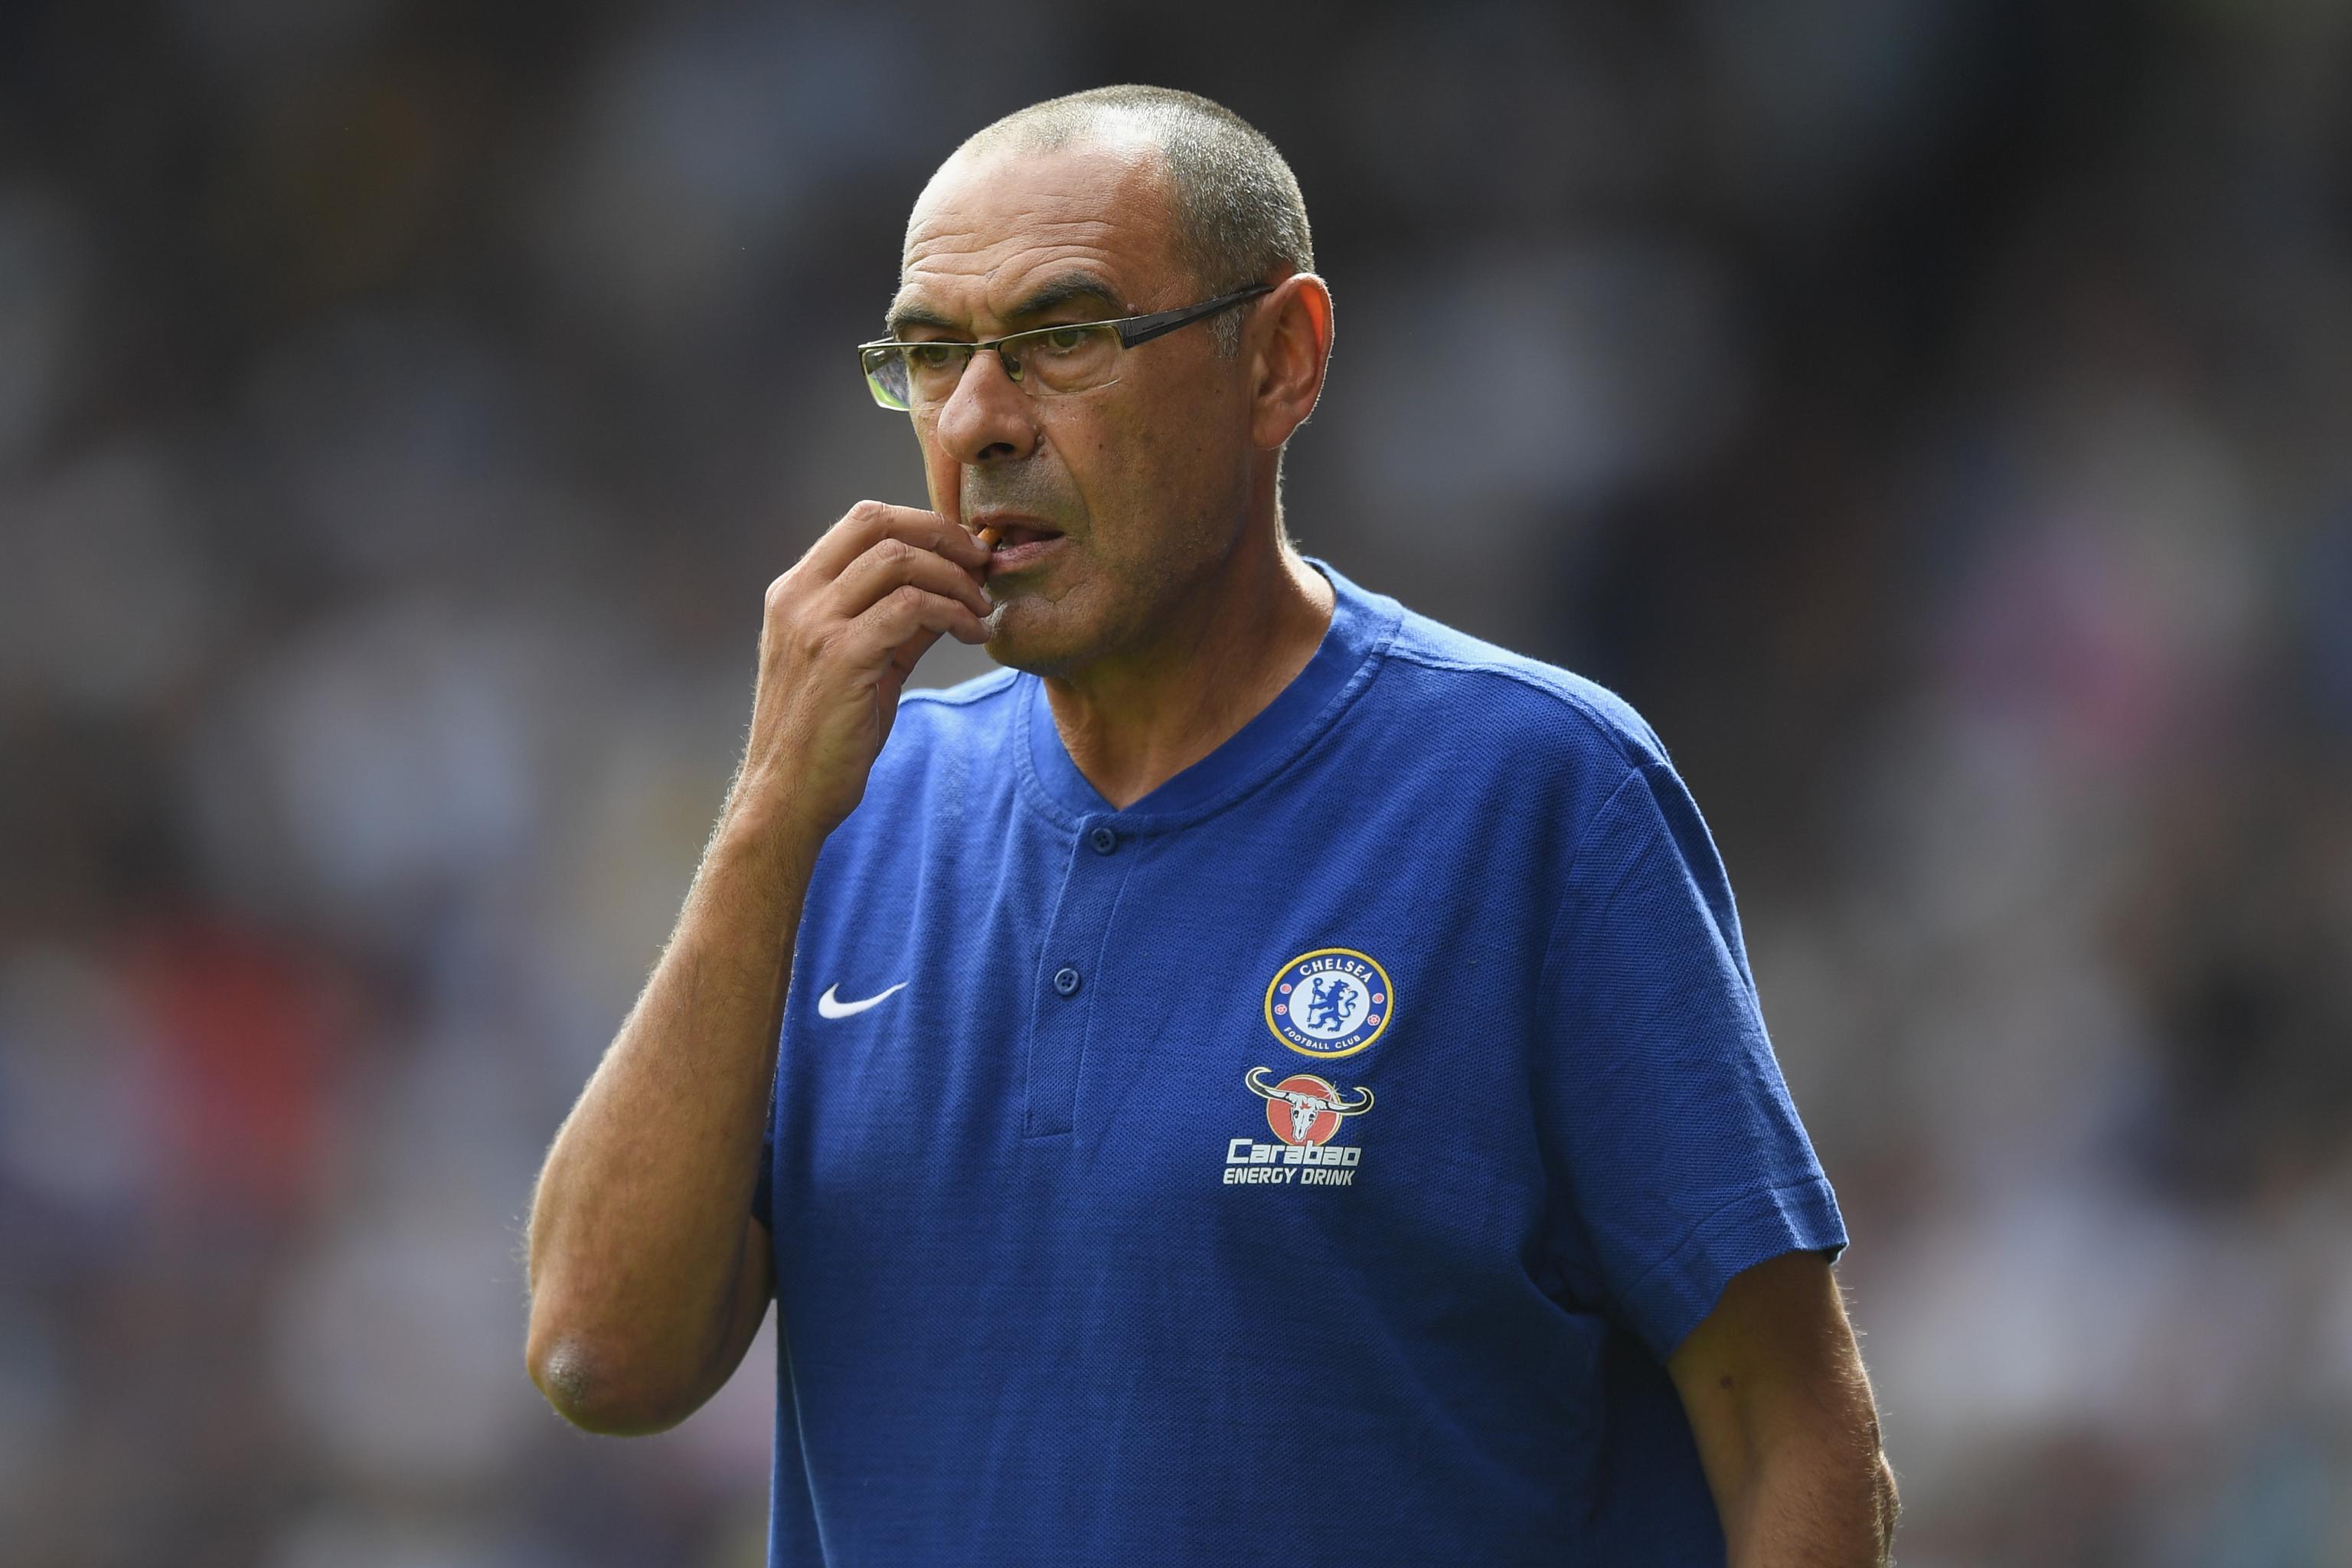 Maurizio Sarri Says He Intends to Quit Smoking While at Chelsea | Bleacher Report | Latest News, Videos and Highlights